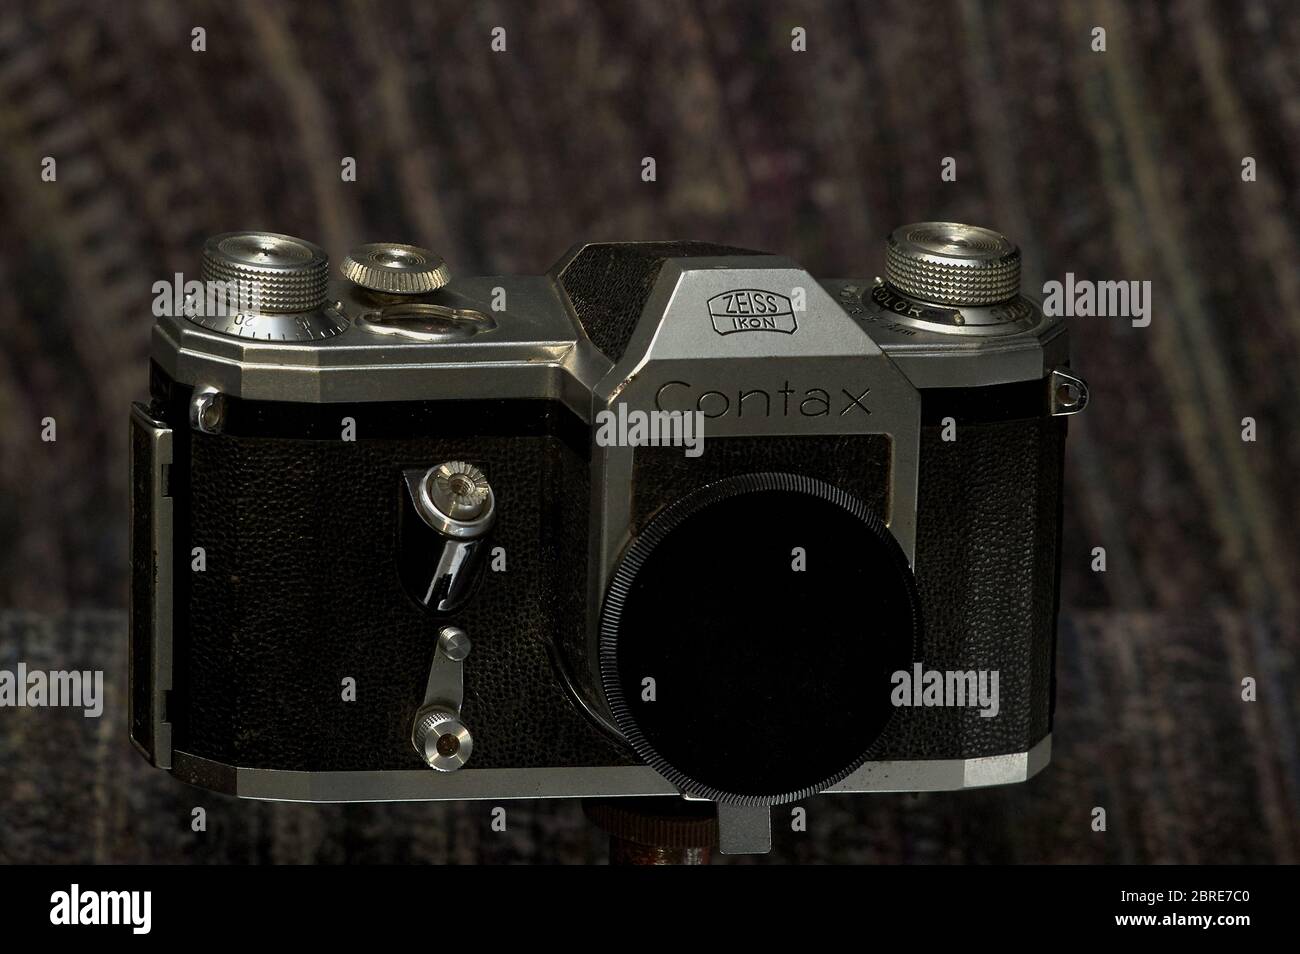 11 Jun 2014 he historic East Germany Contax S, the second pentaprism SLR for eye-level viewing Studio shot Kalyan Maharashtra India Stock Photo